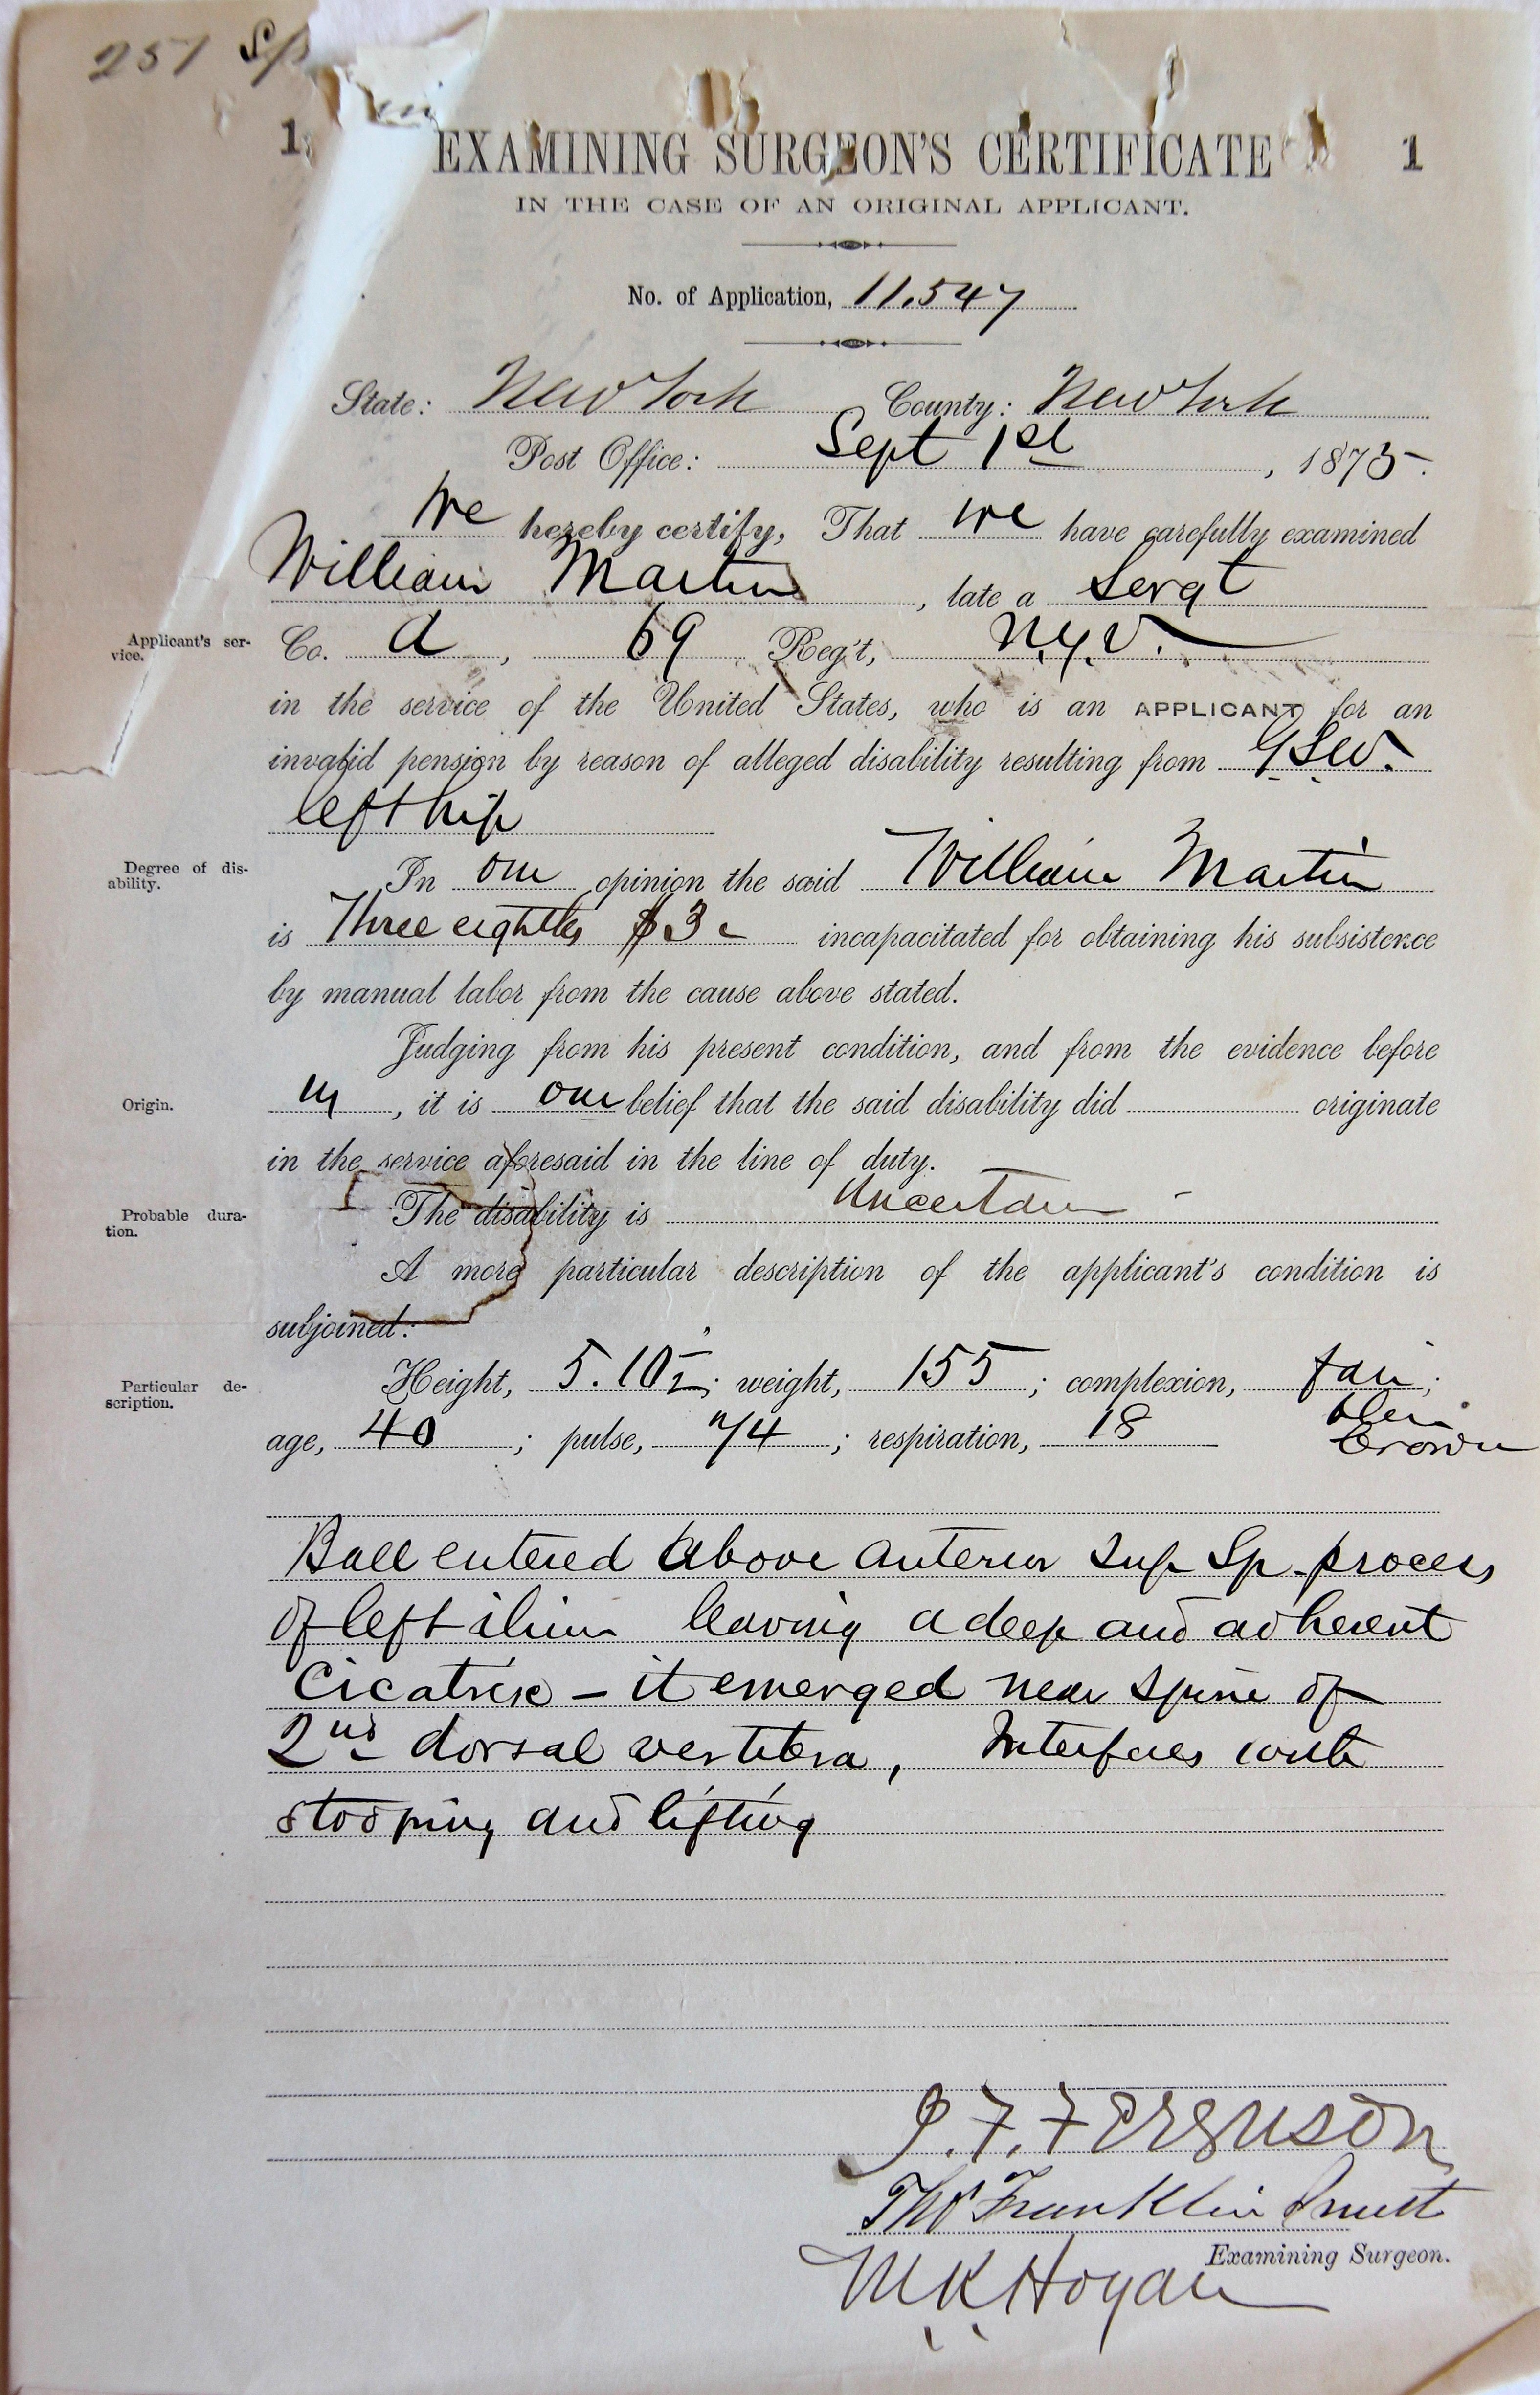 Image of a surgeon's certificate for William Martin's 1875 pension application